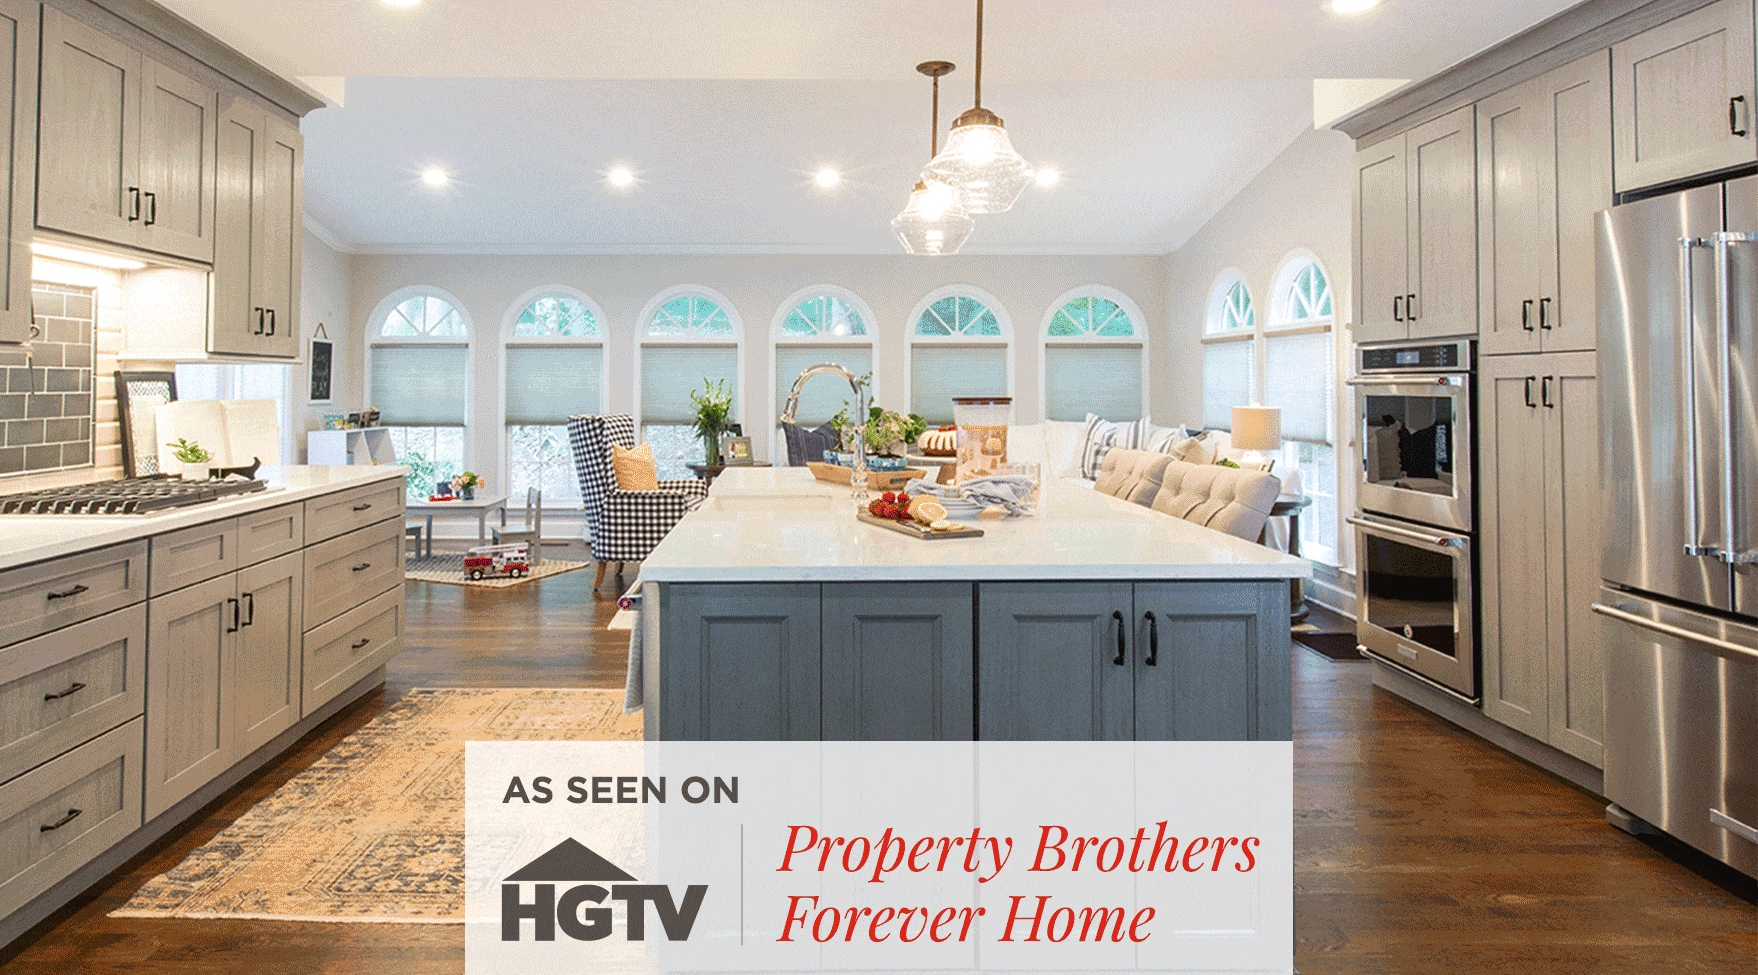 Kitchen Cabinet Kings Cabinets Featured on HGTV, DIY Network, ABC, CBS, & TLC.